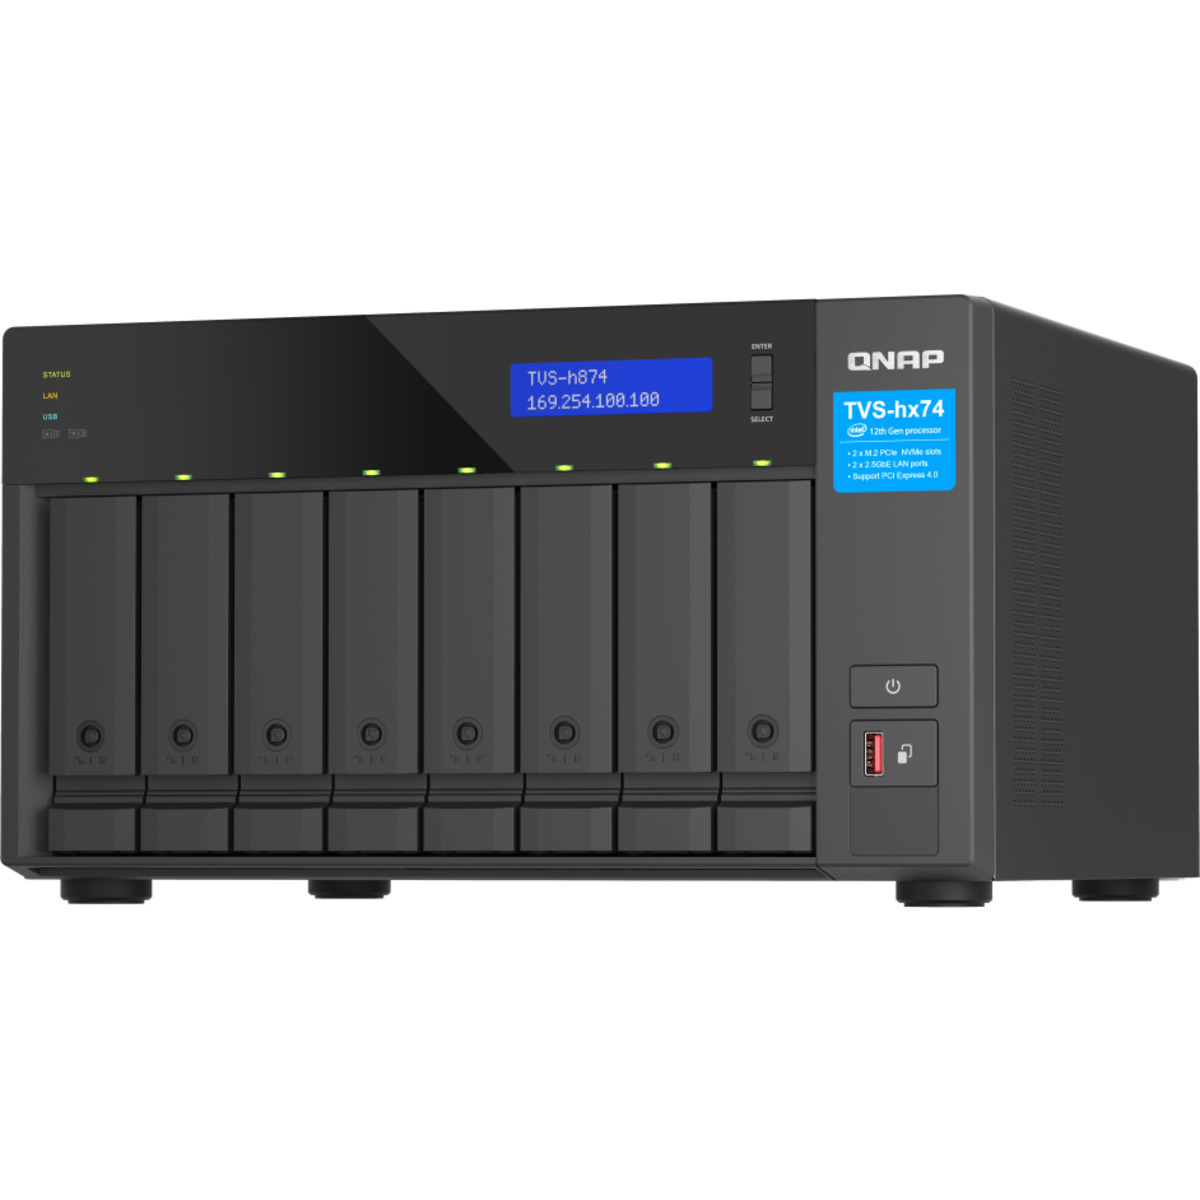 QNAP TVS-h874 Core i7 126tb 8-Bay Desktop Multimedia / Power User / Business NAS - Network Attached Storage Device 7x18tb Toshiba Enterprise Capacity MG09ACA18TE 3.5 7200rpm SATA 6Gb/s HDD ENTERPRISE Class Drives Installed - Burn-In Tested TVS-h874 Core i7